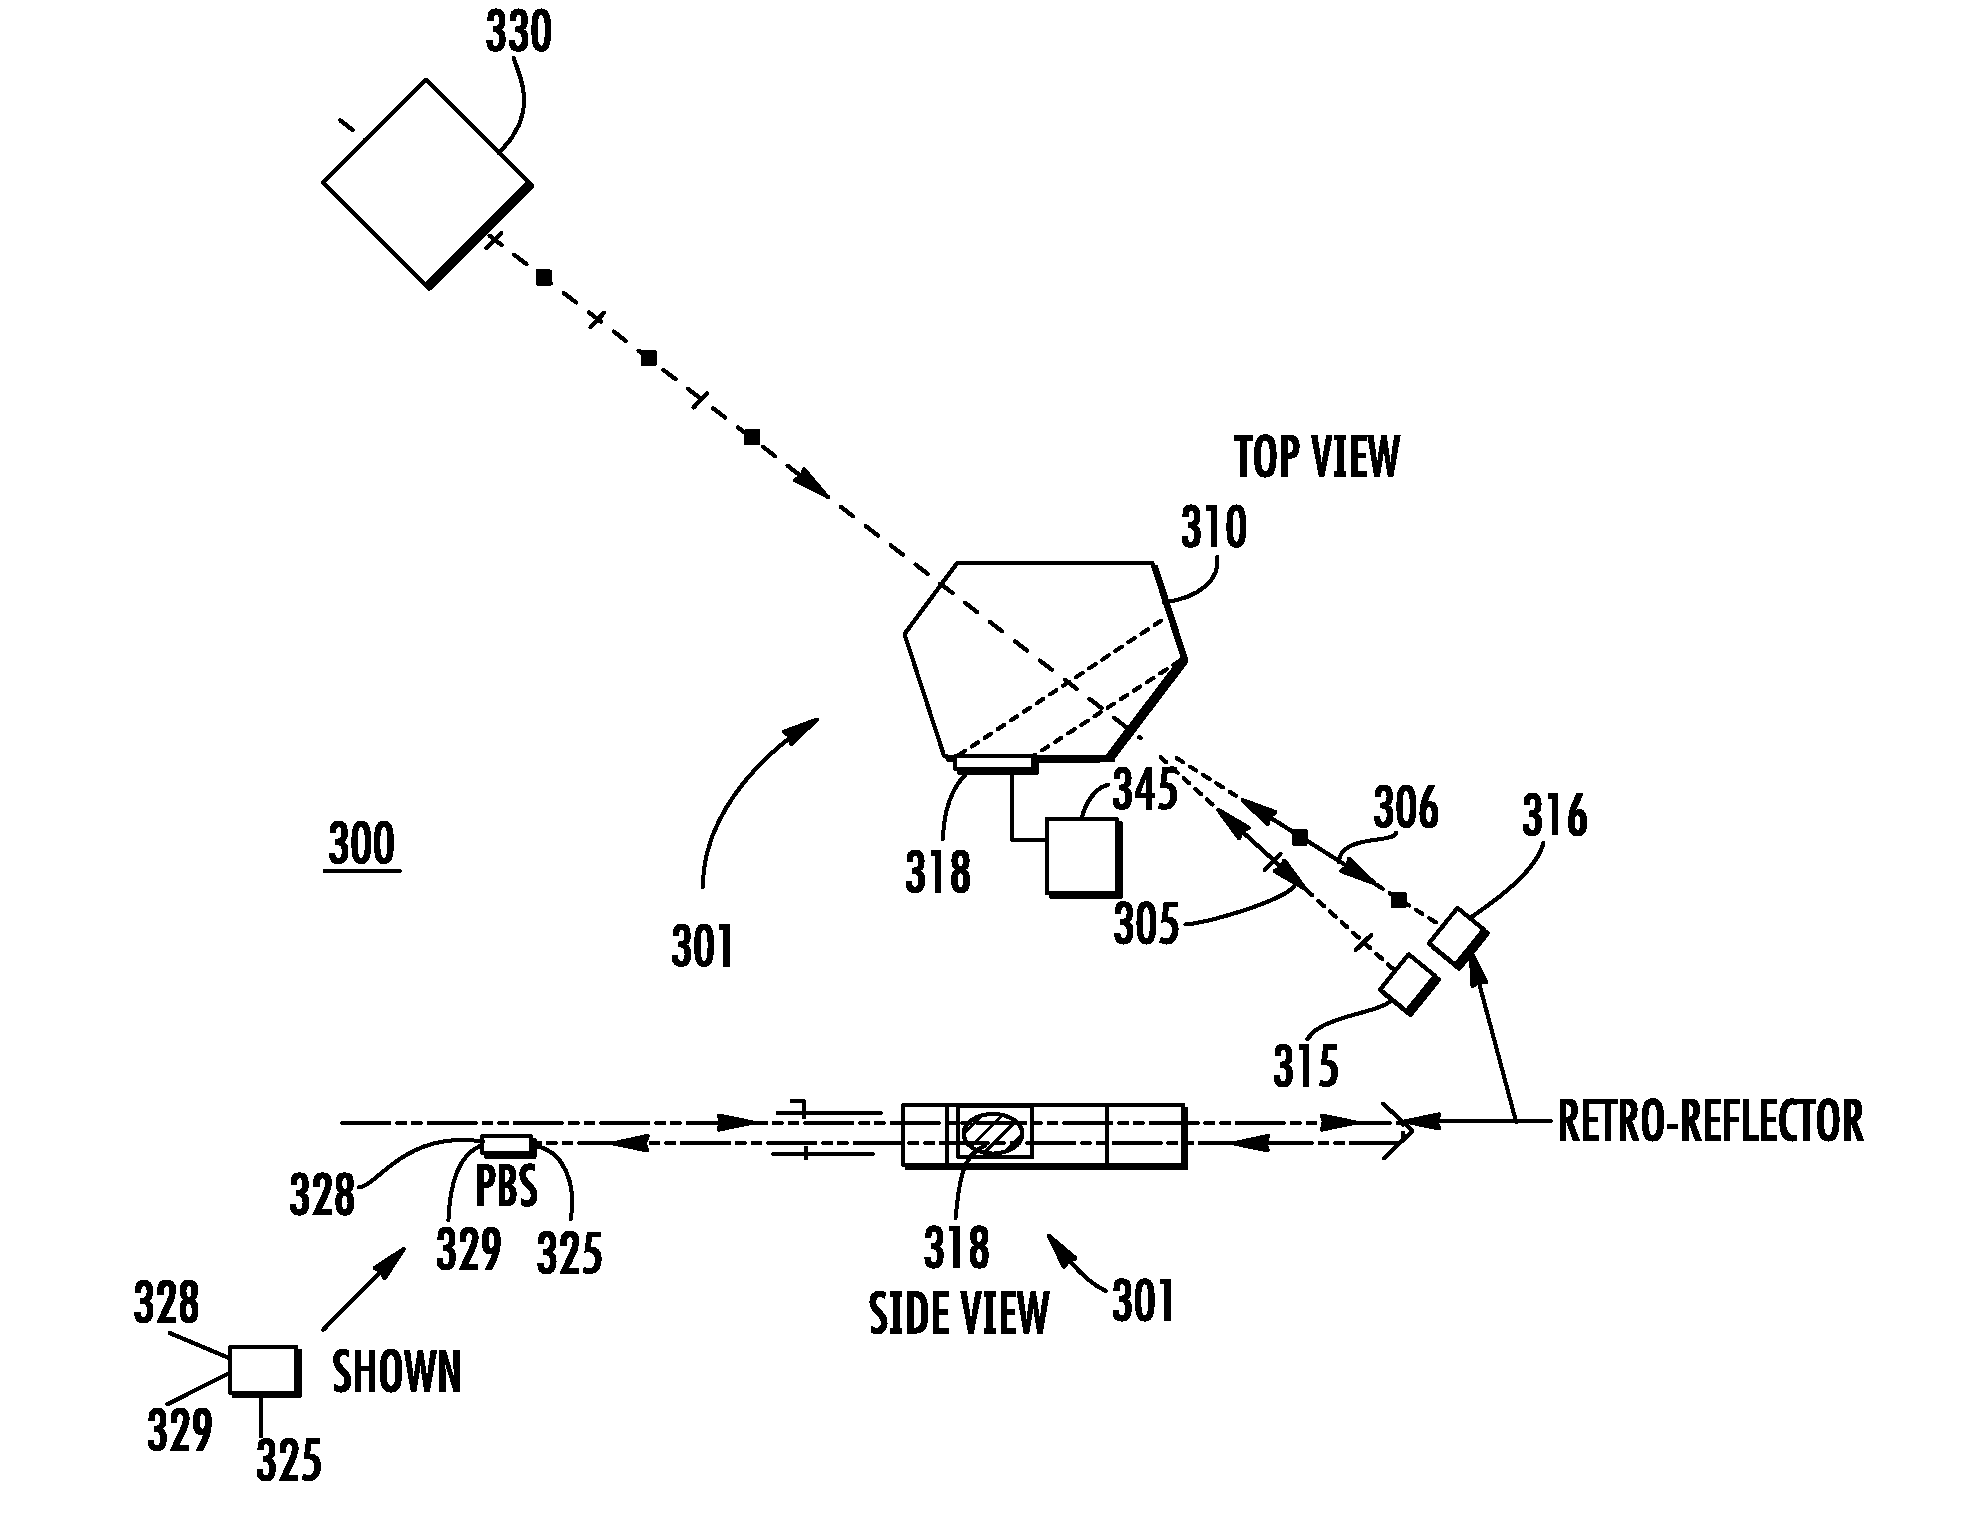 High frequency acousto-optic frequency shifter having wide acceptance angle